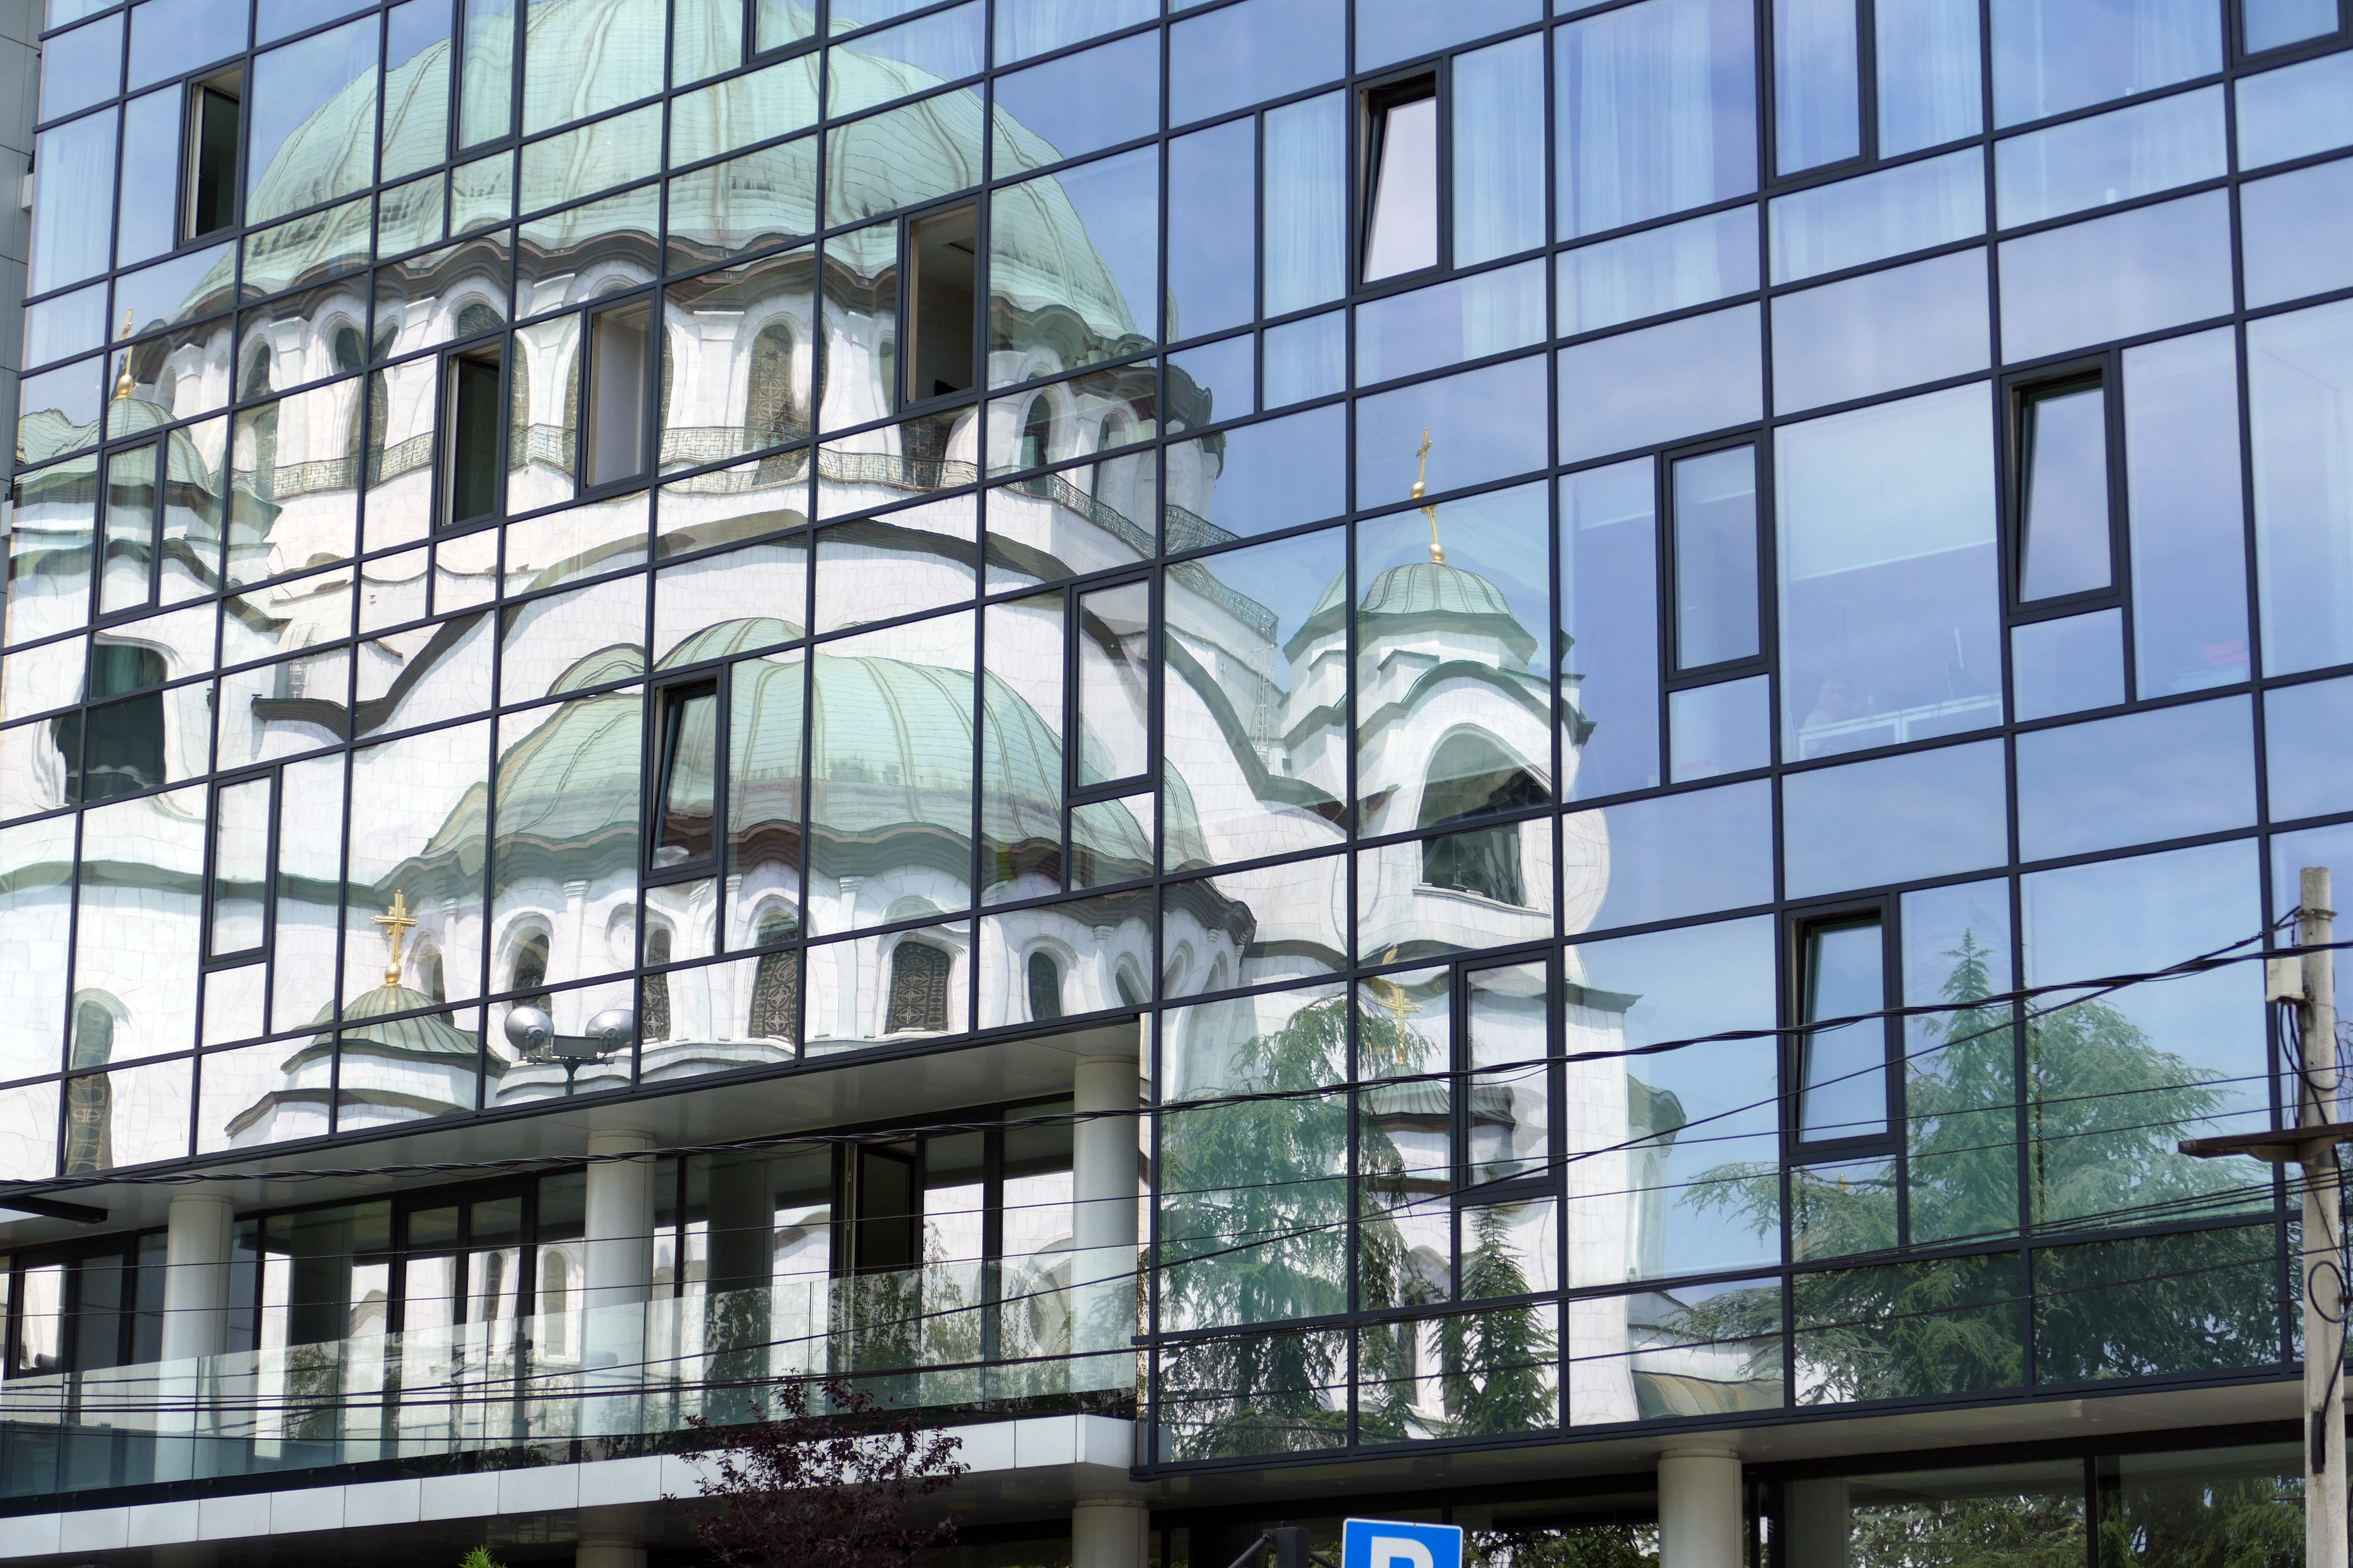 Reflection of the Cathedral of Saint Savas in Belgrade, Serbia